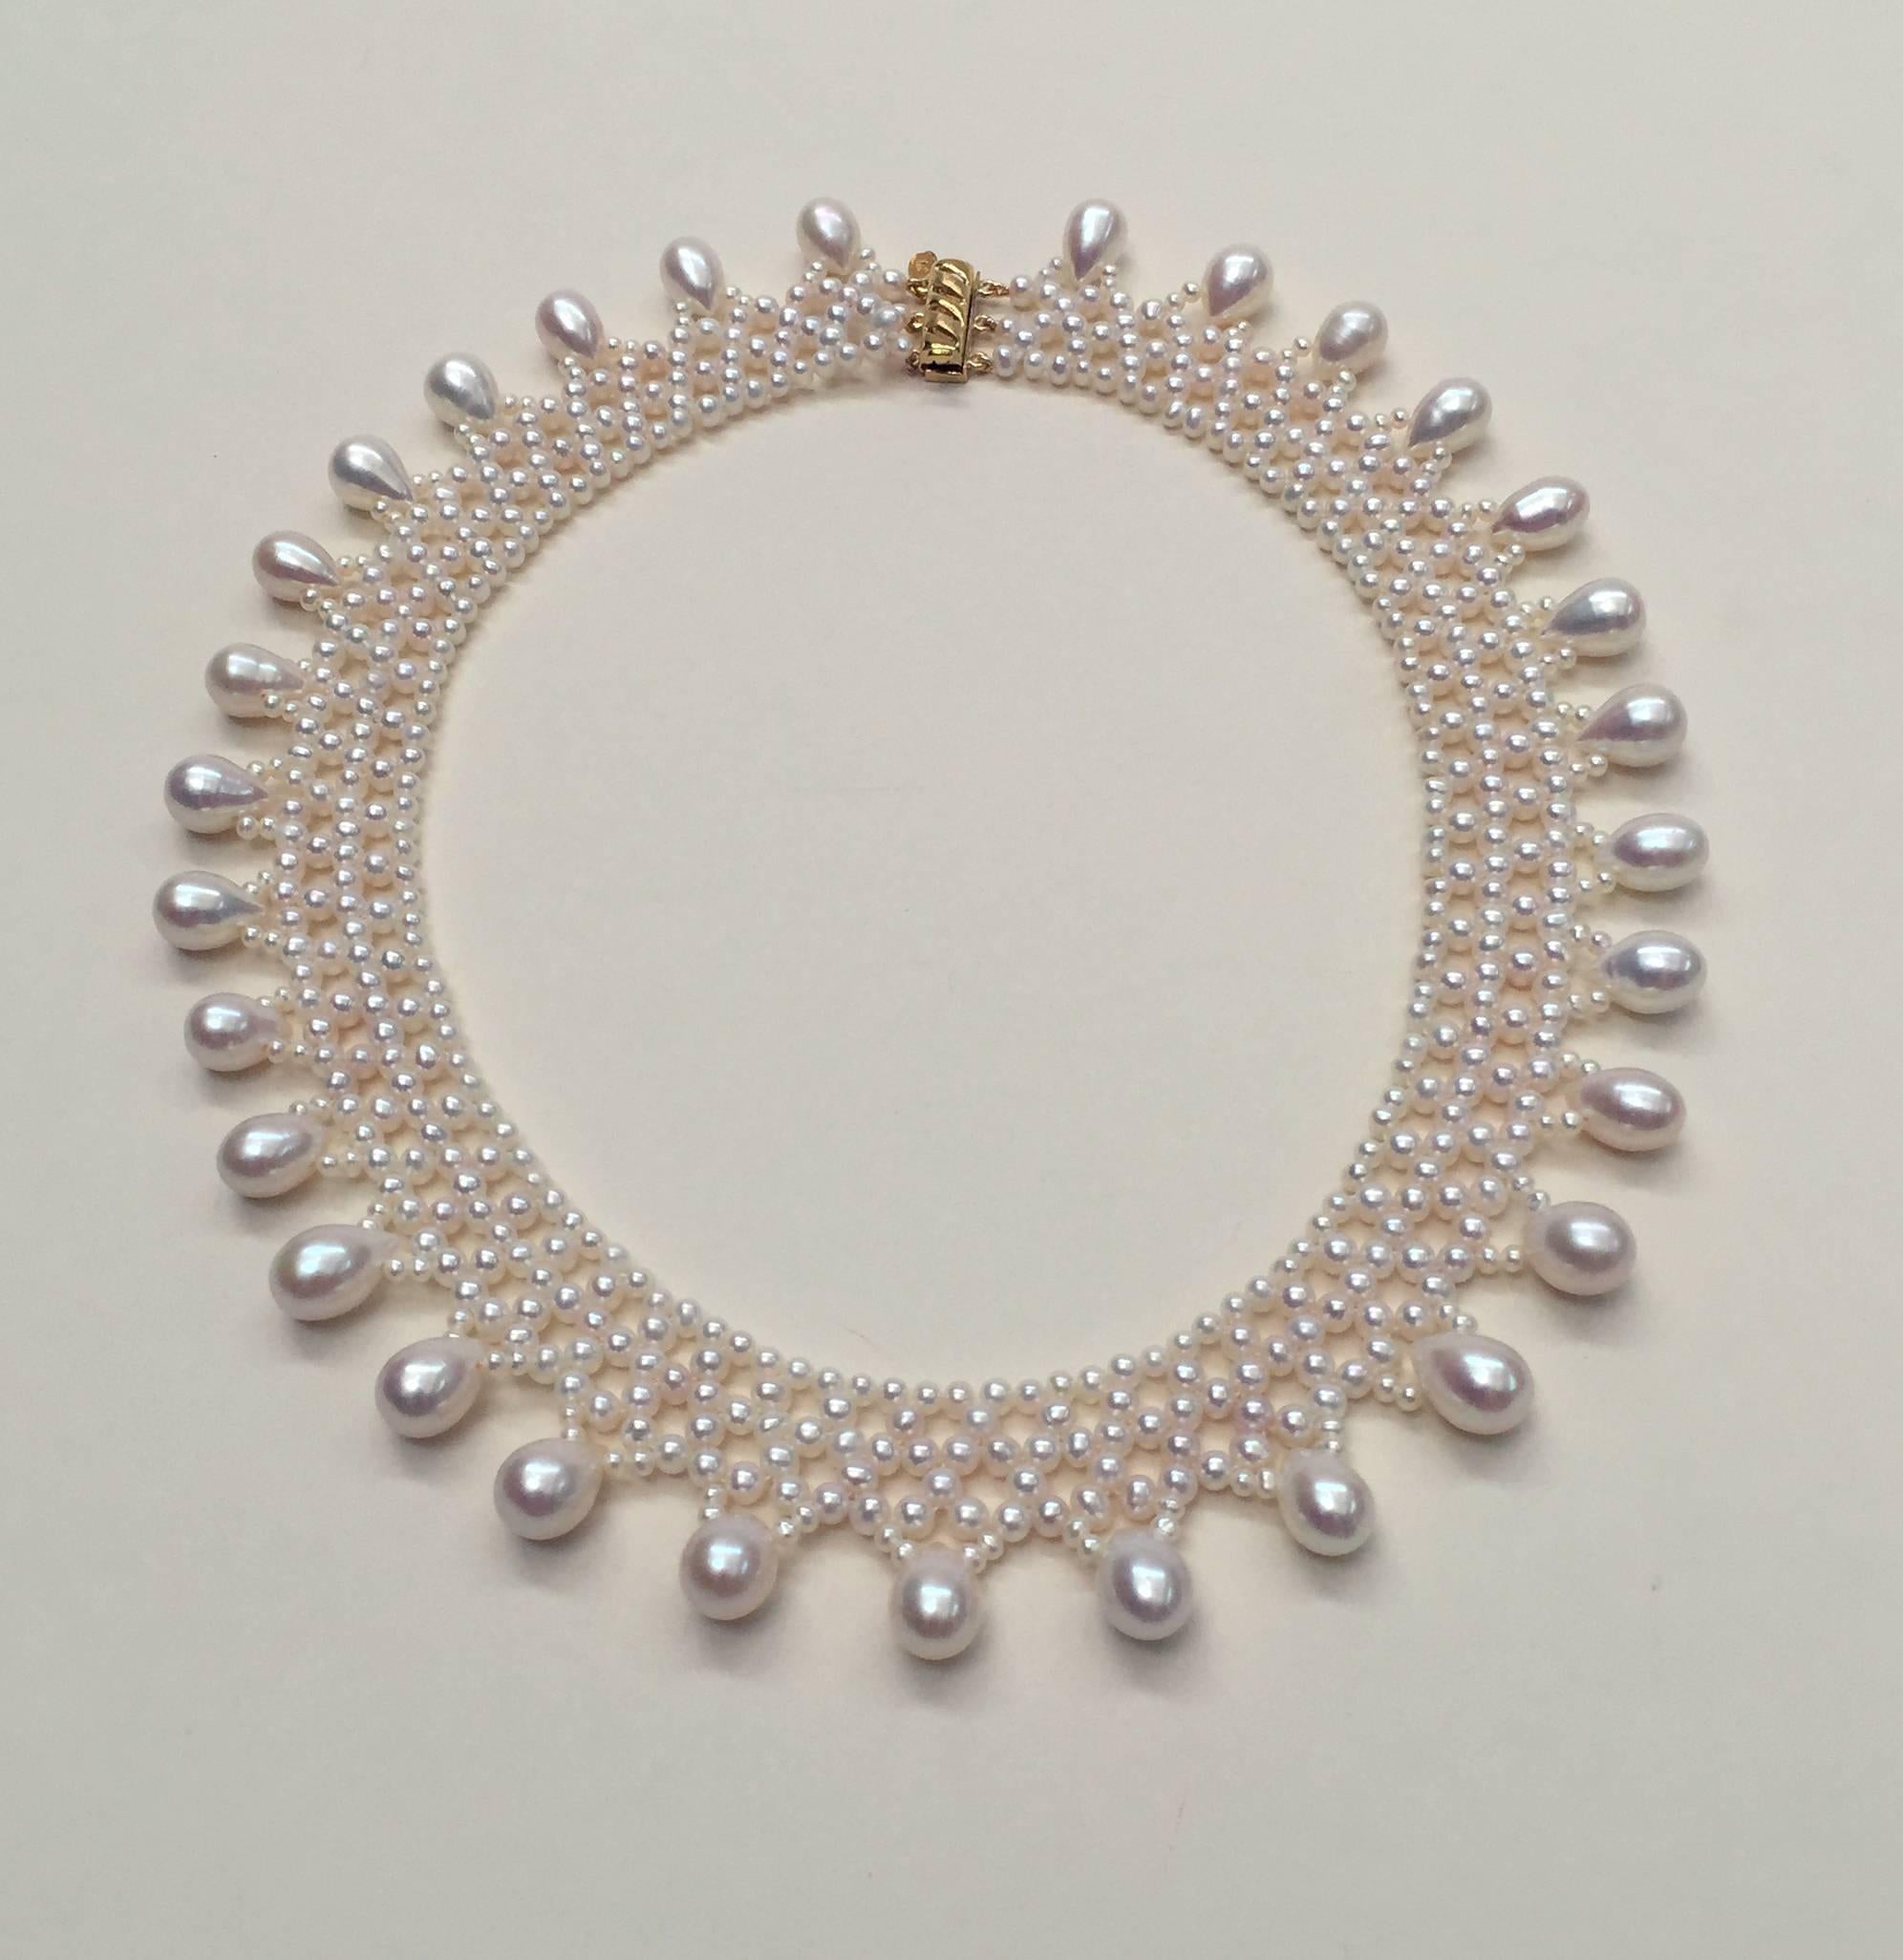   Marina J  Woven Pearl Necklace with Pear-Shaped Pearl Drops and sliding clasp For Sale 1